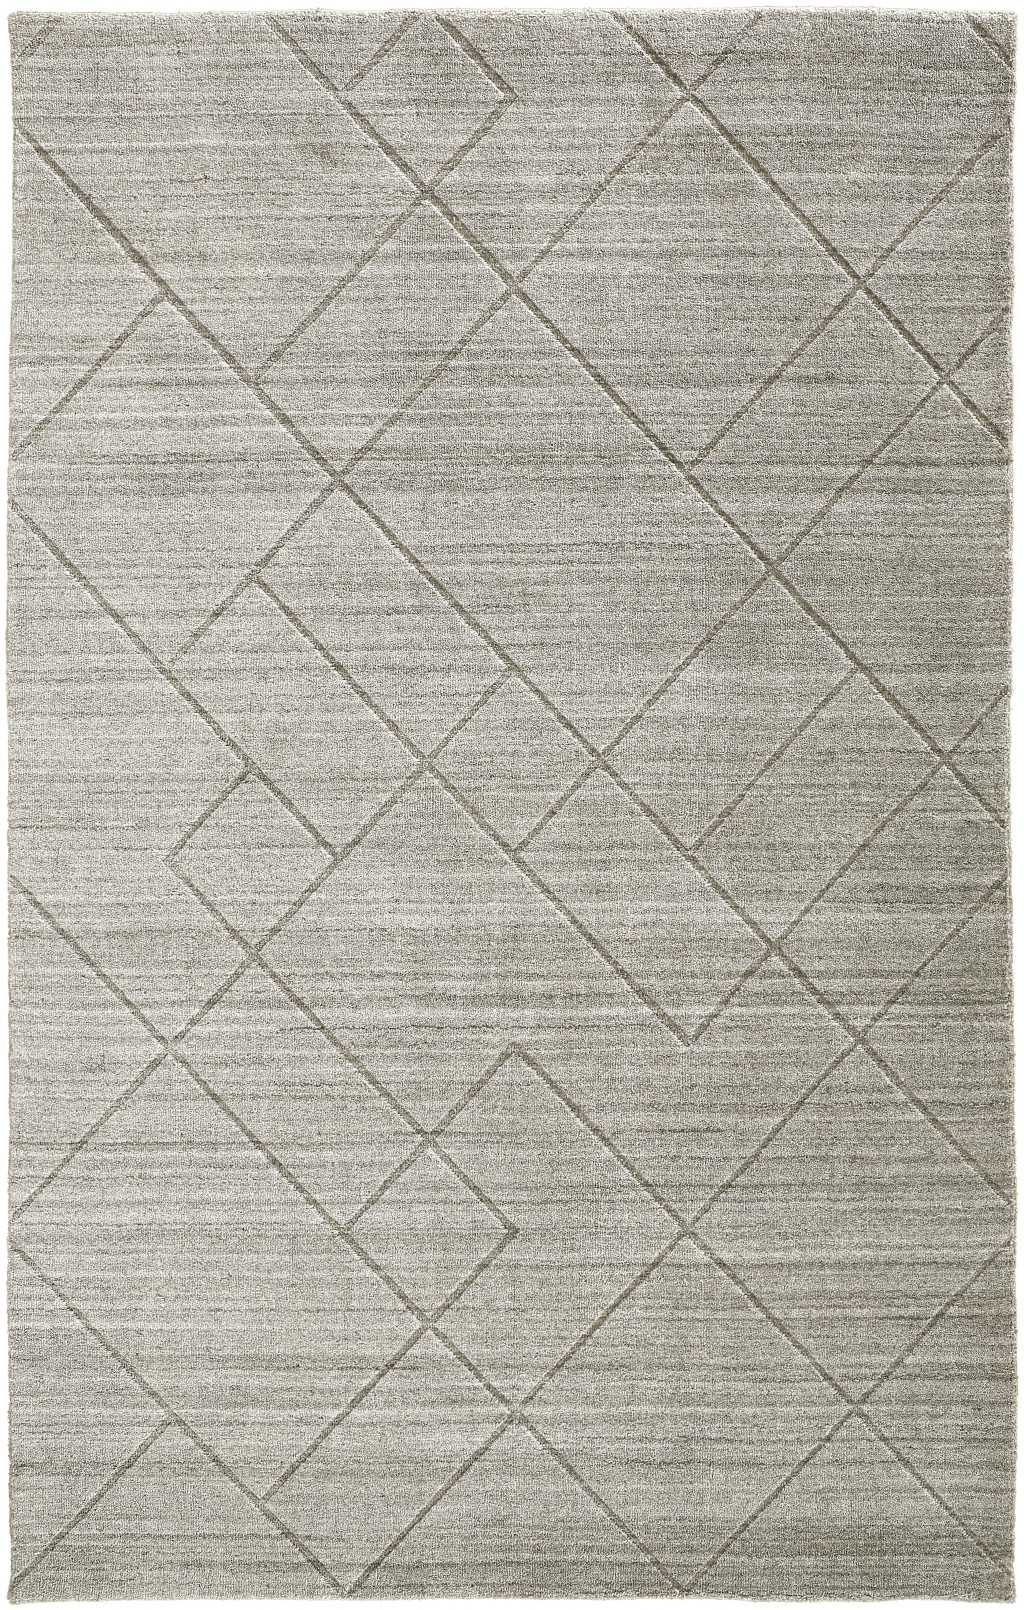 12' X 15' Ivory And Silver Striped Hand Woven Area Rug-514789-1